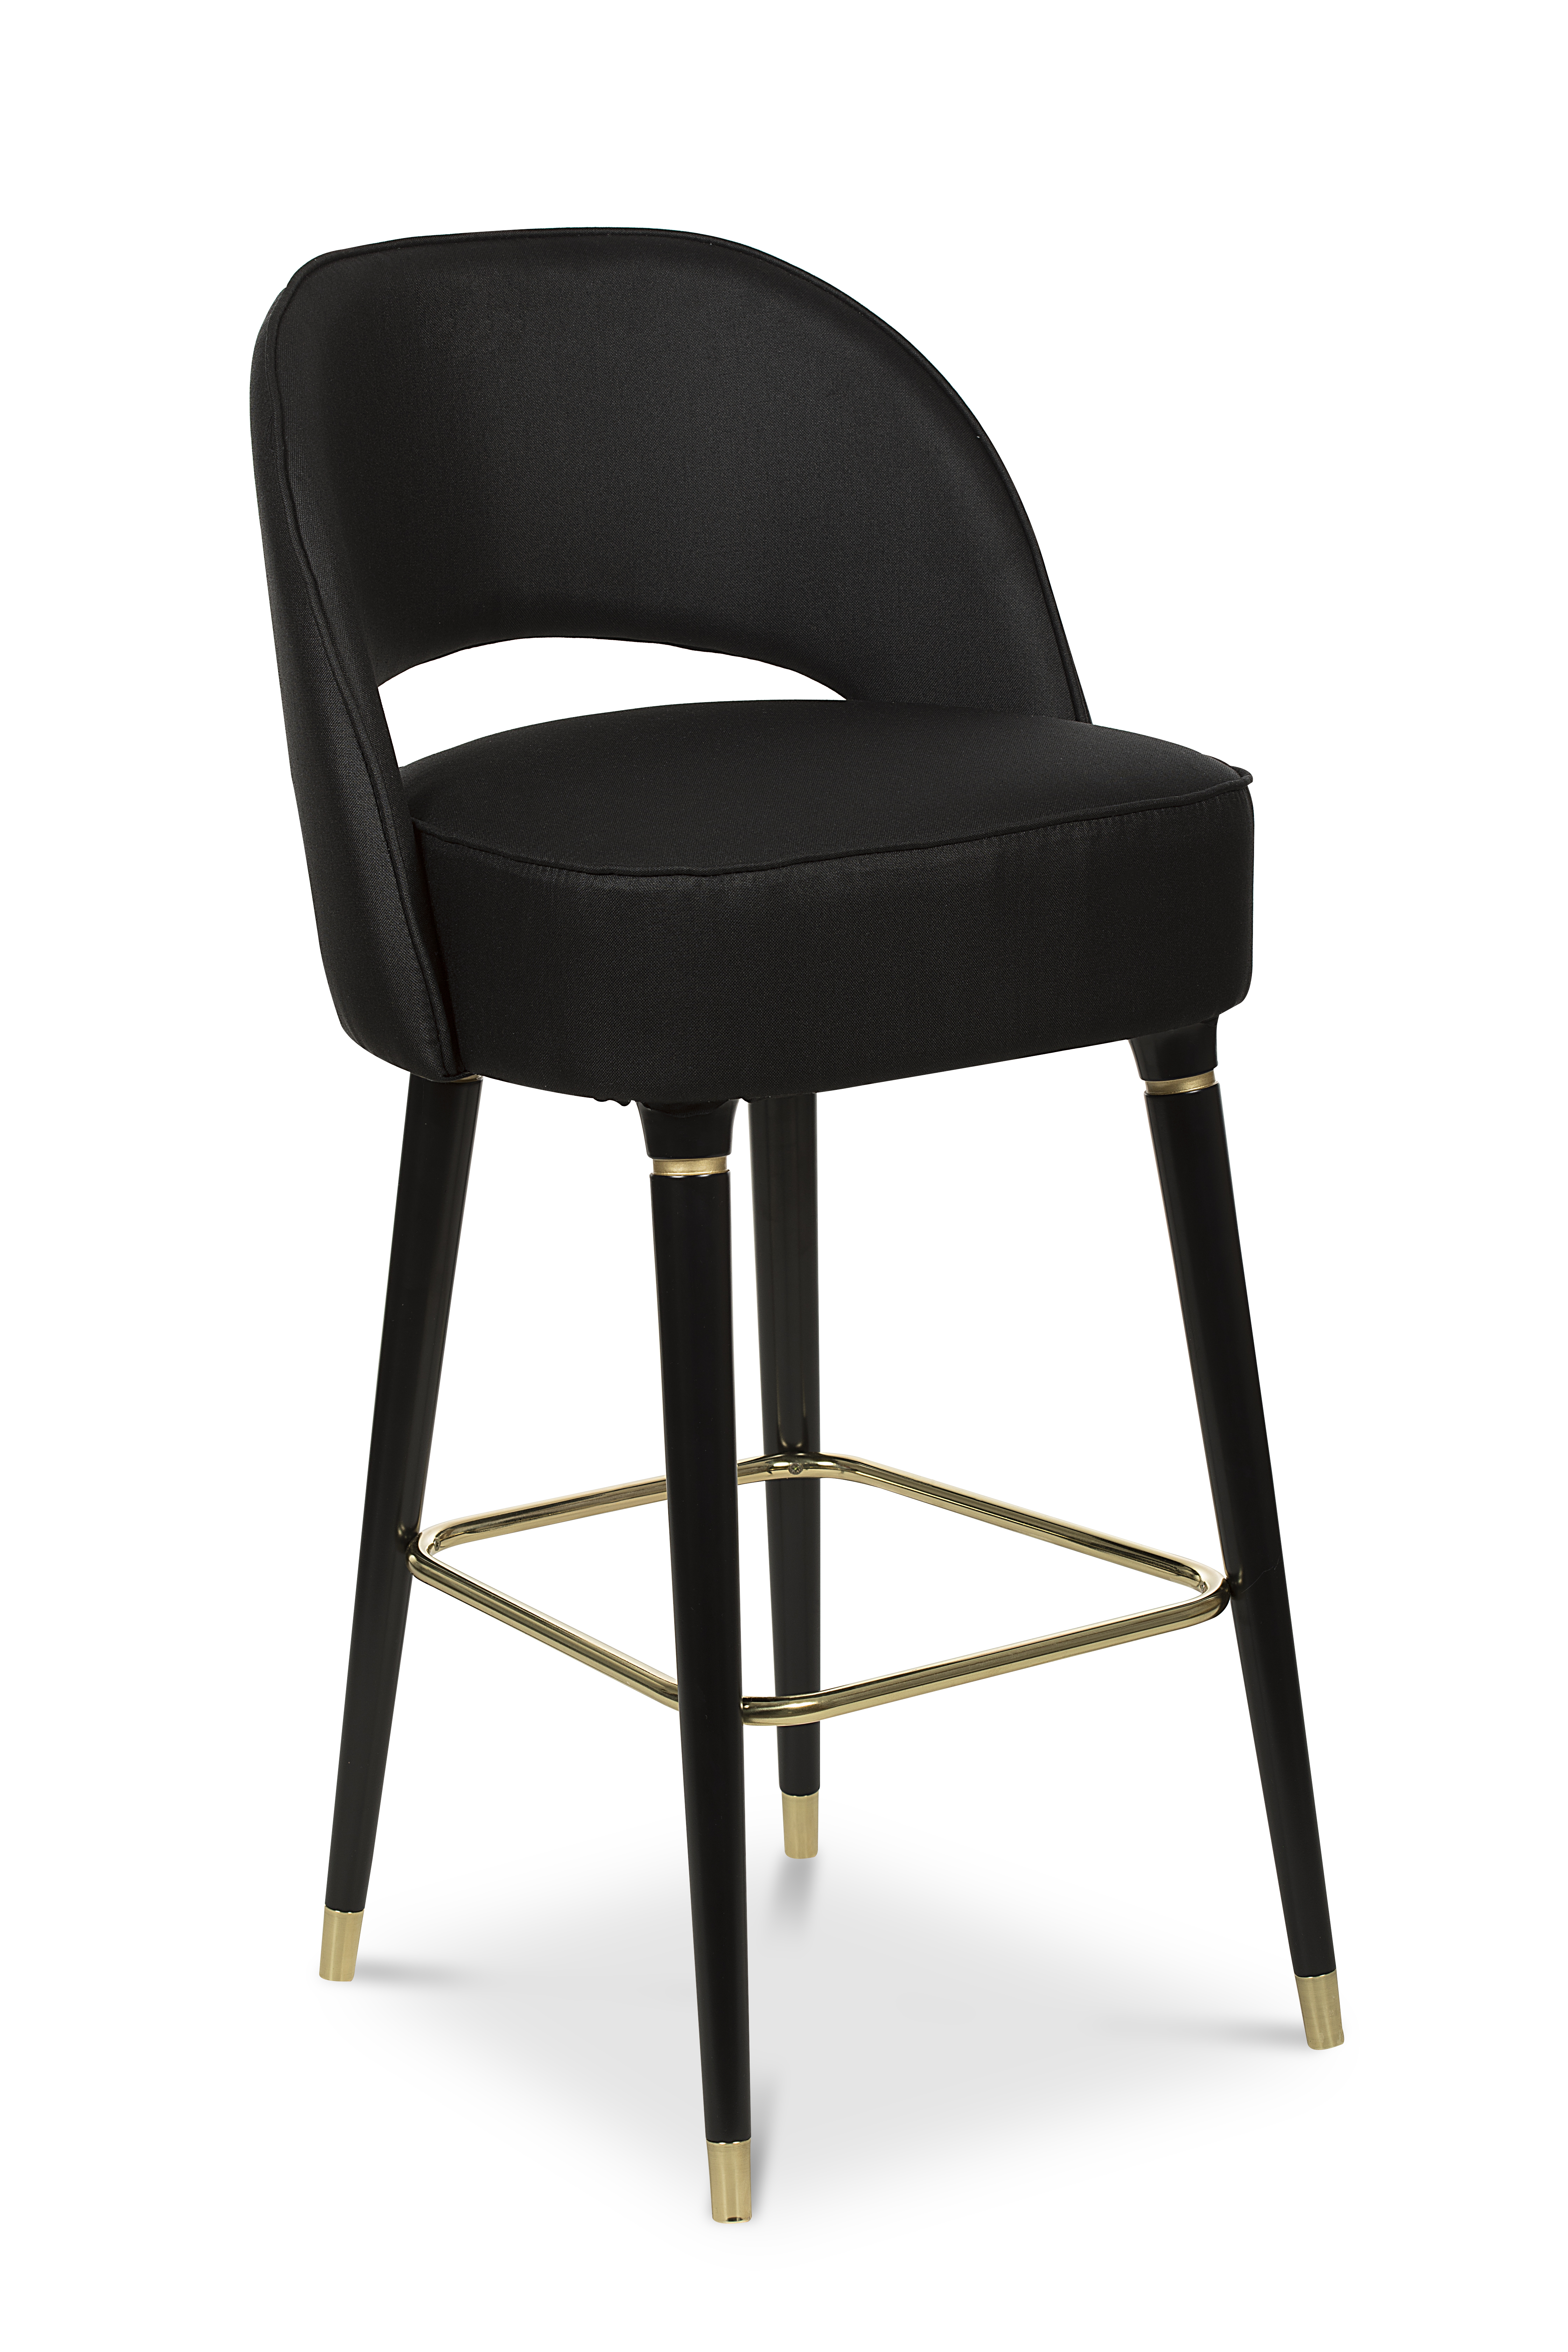 Review- Is Collins Mid-Century Modern Bar Chair the Right Choice?